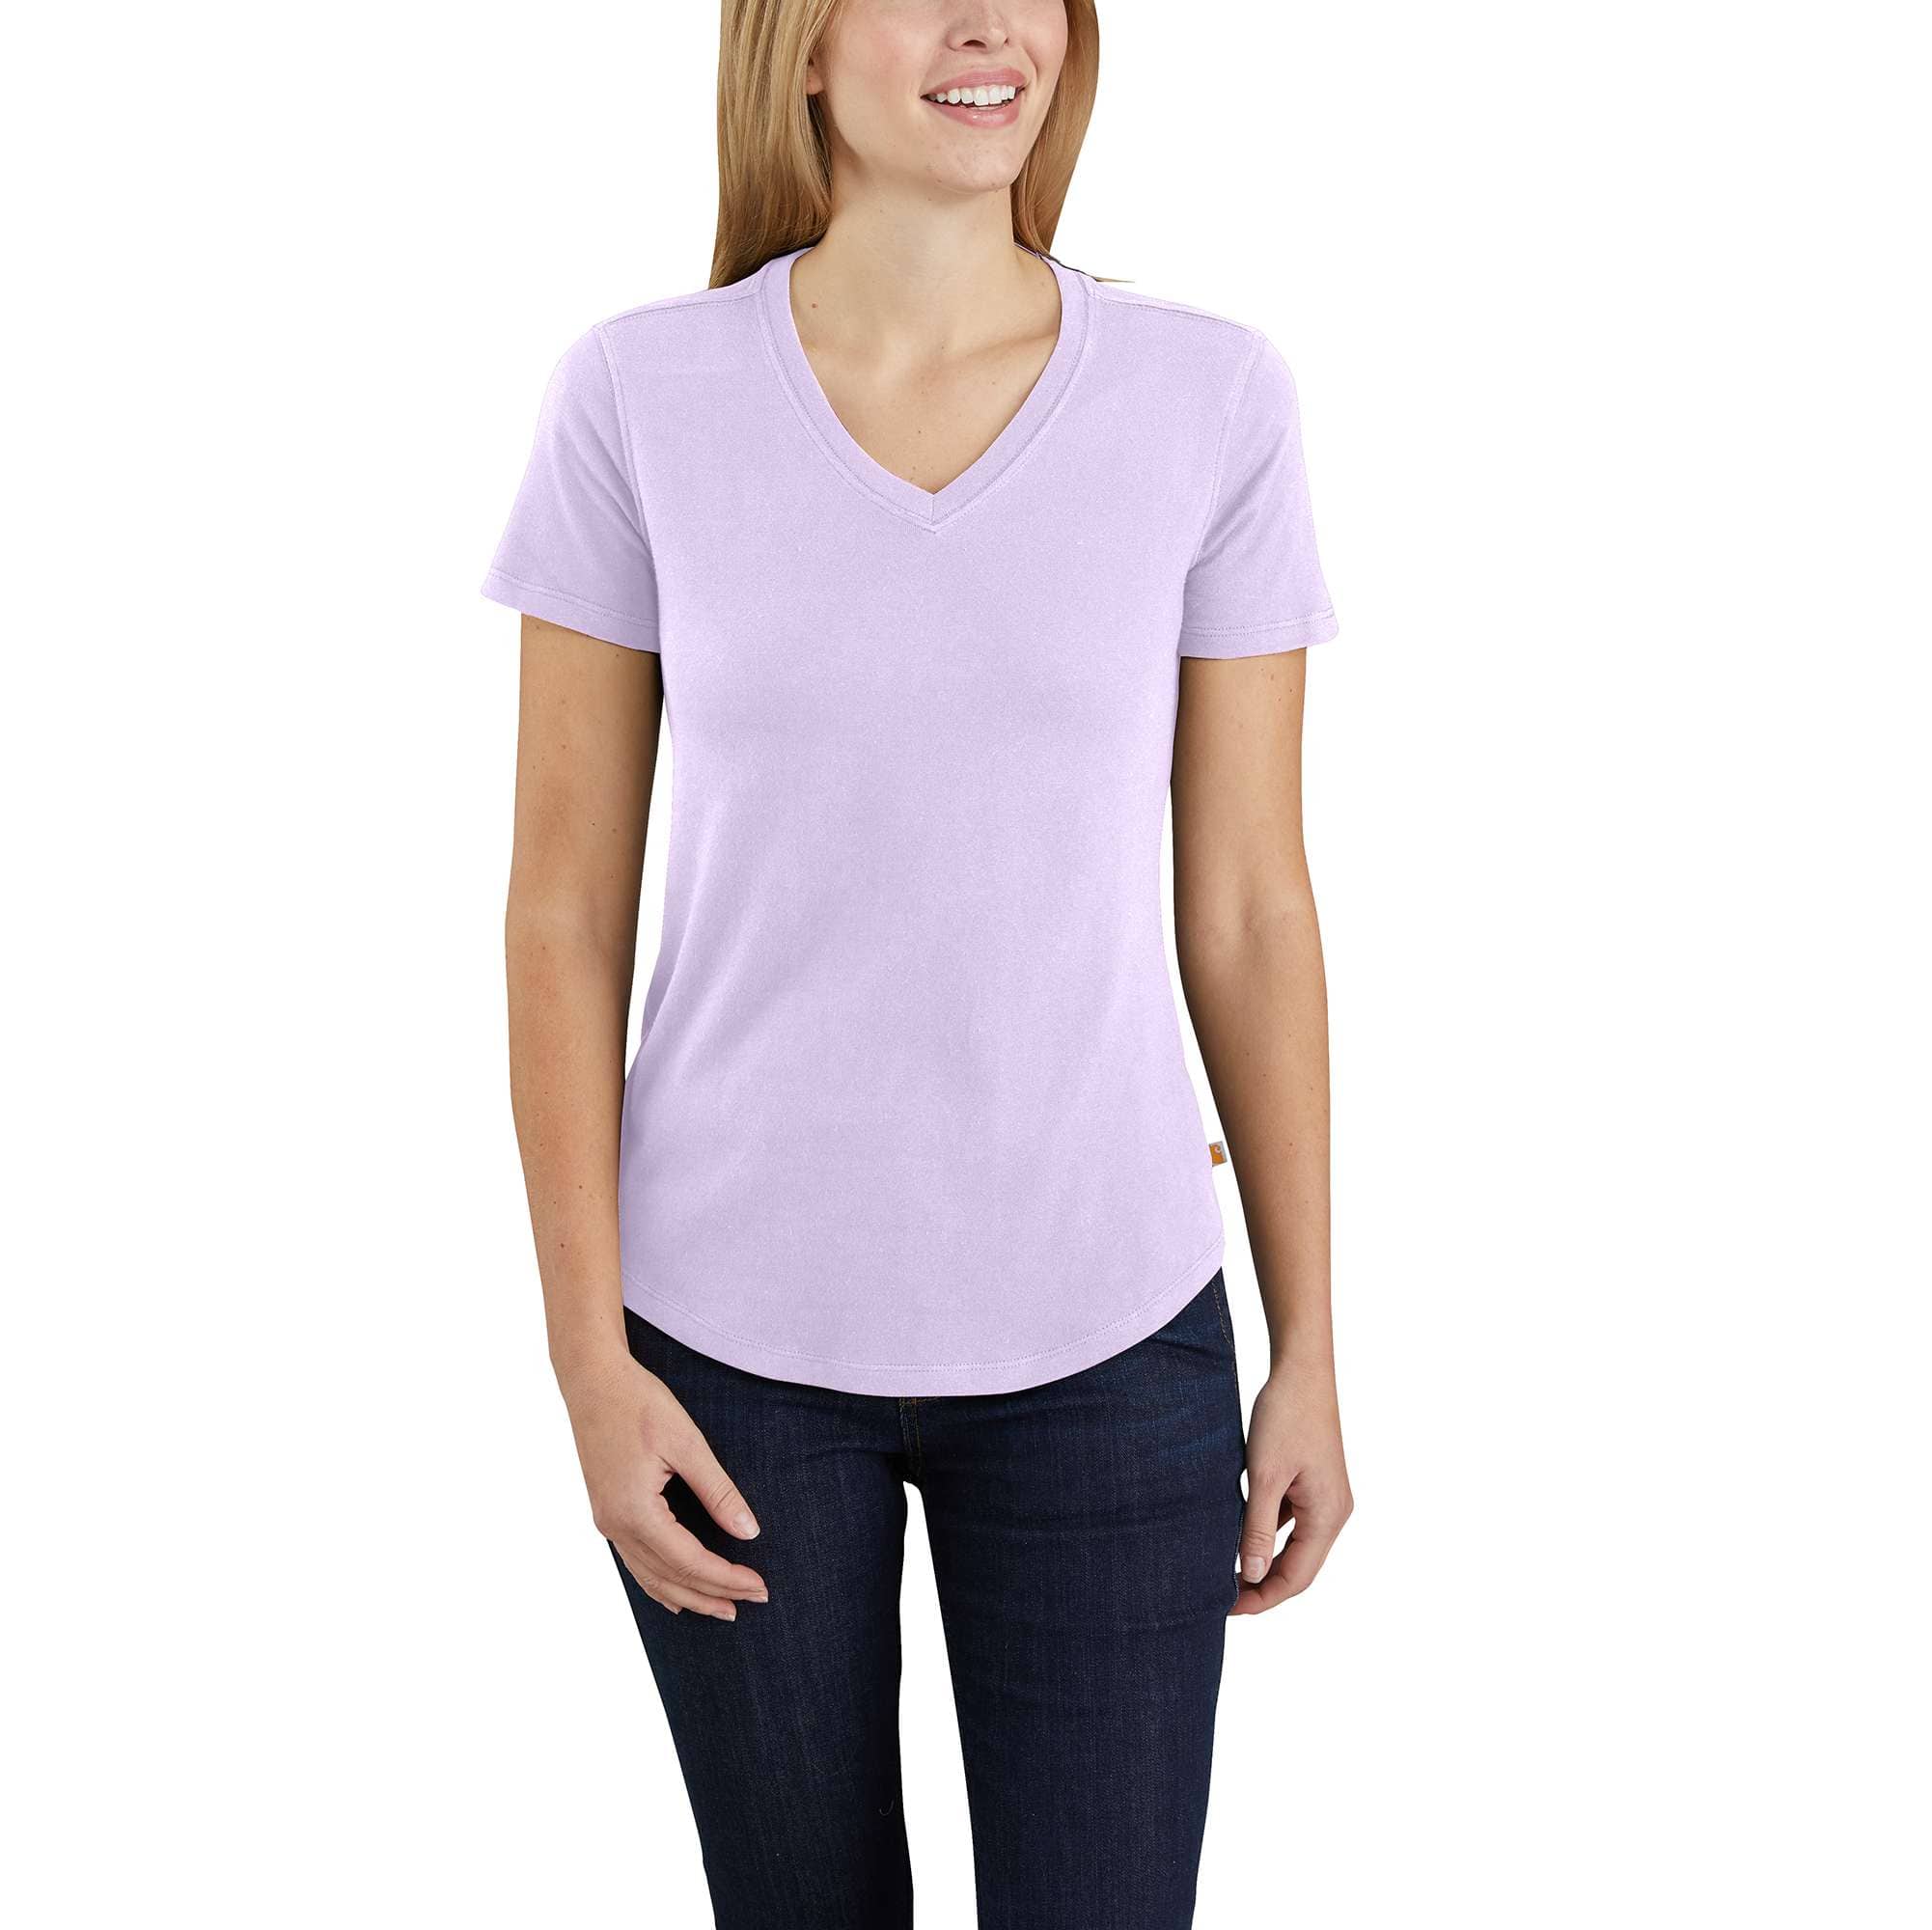 Carhartt Women's Relaxed Fit Midweight Short Sleeve V-Neck Tee (Amethyst Fog) $8 + Free Shipping